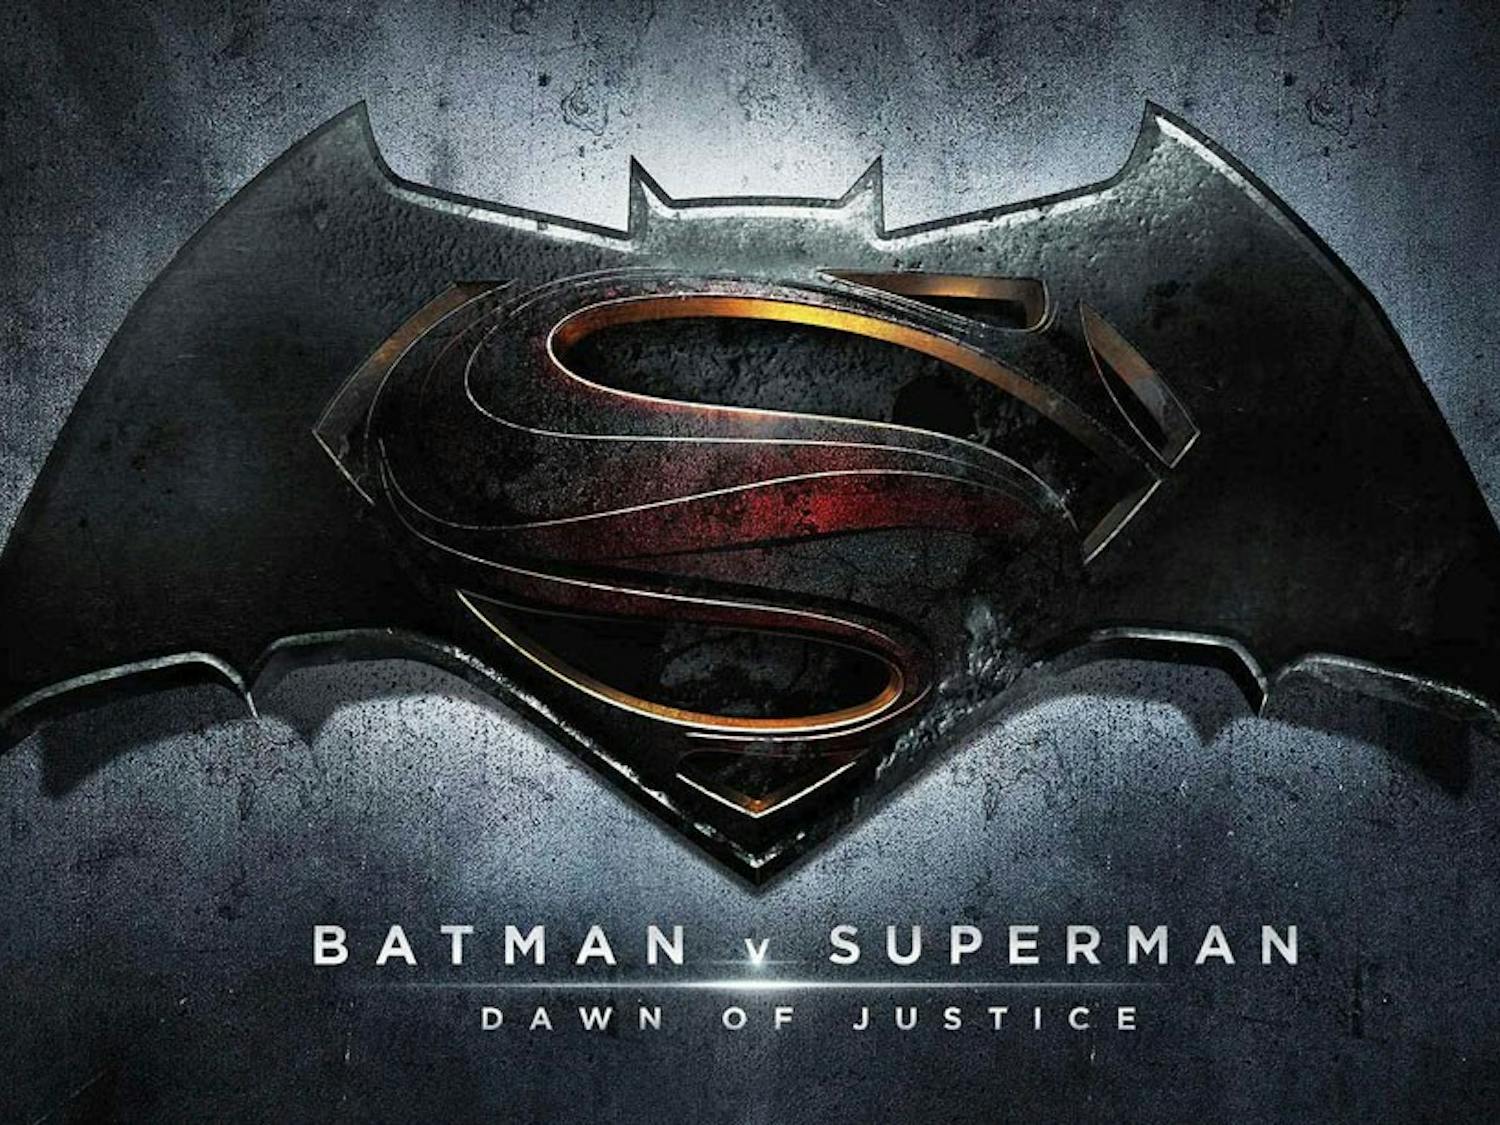 "Batman V Superman: Dawn of Justice" is one of the most anticipated films of the year&nbsp;and hits theaters March 25.&nbsp;